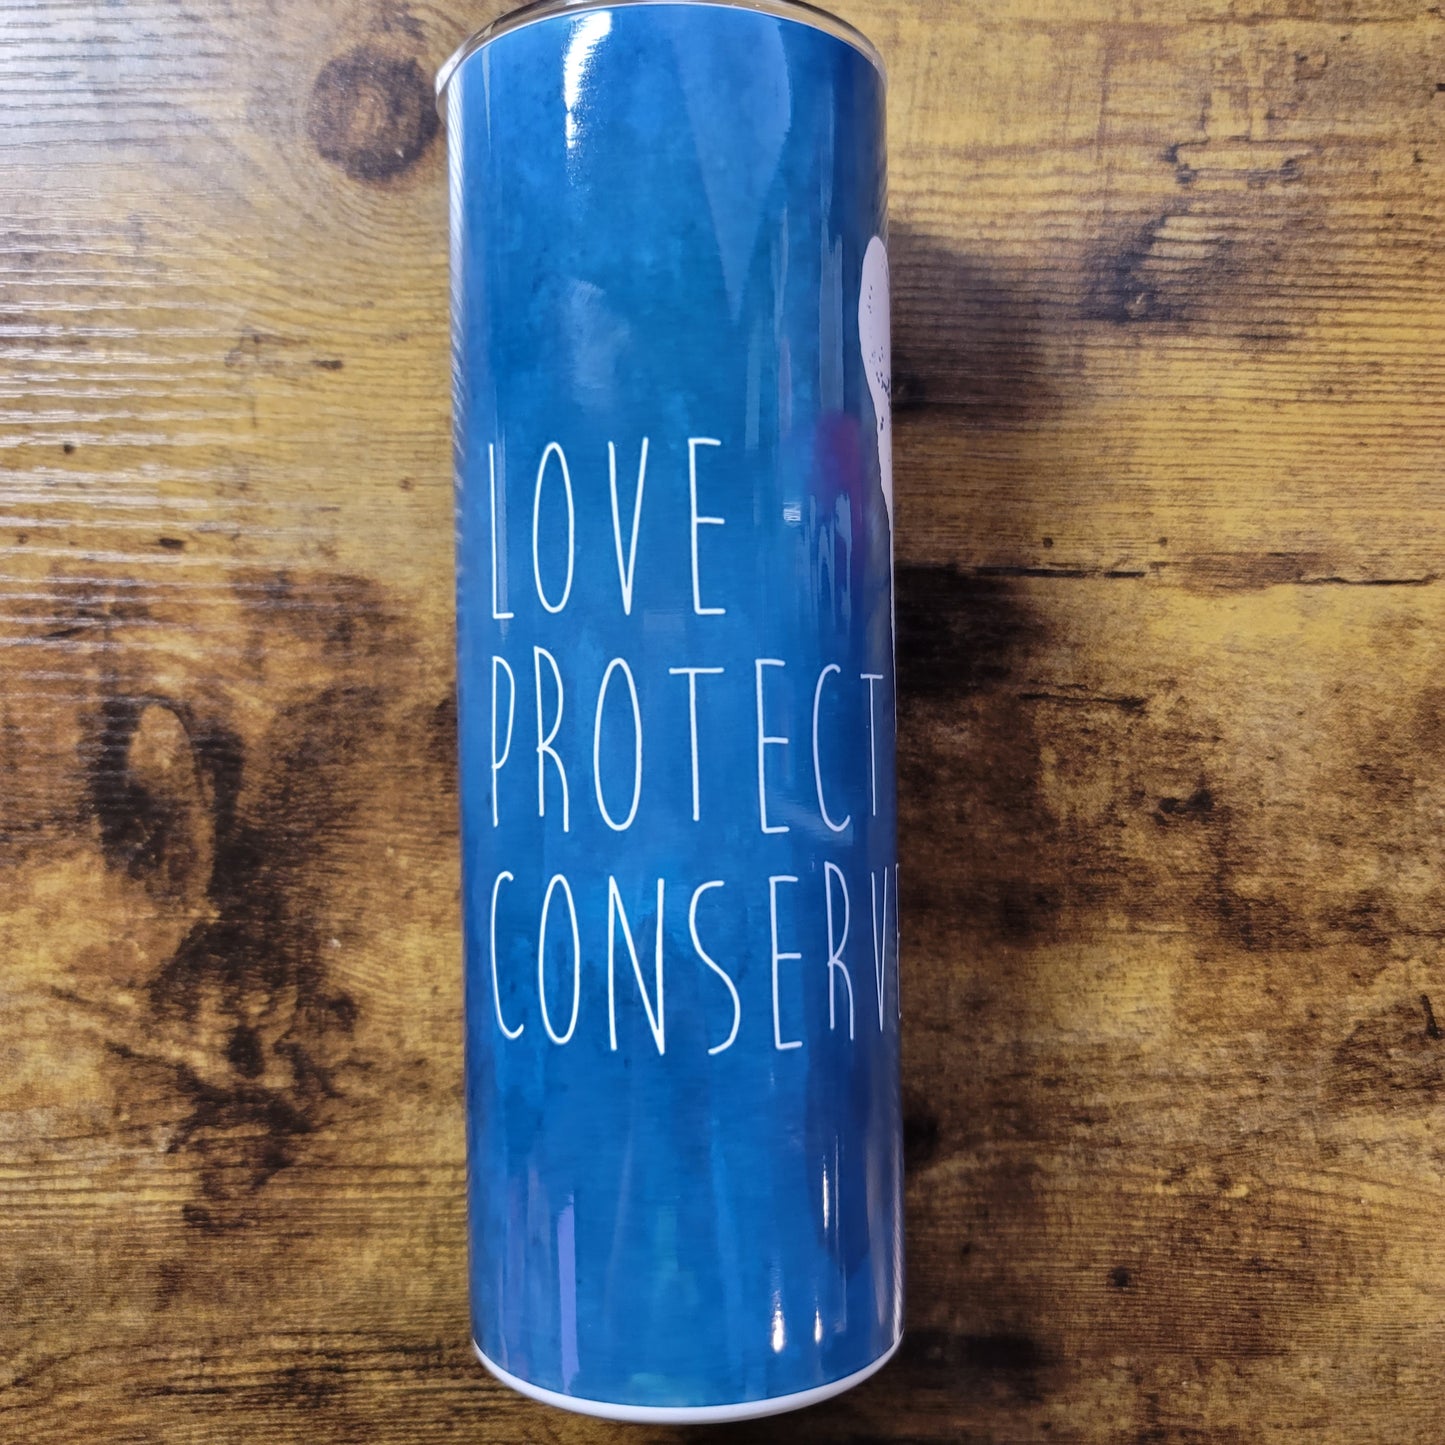 Cougar LPC on Light Blue Watercolor Tumbler (Made to Order)